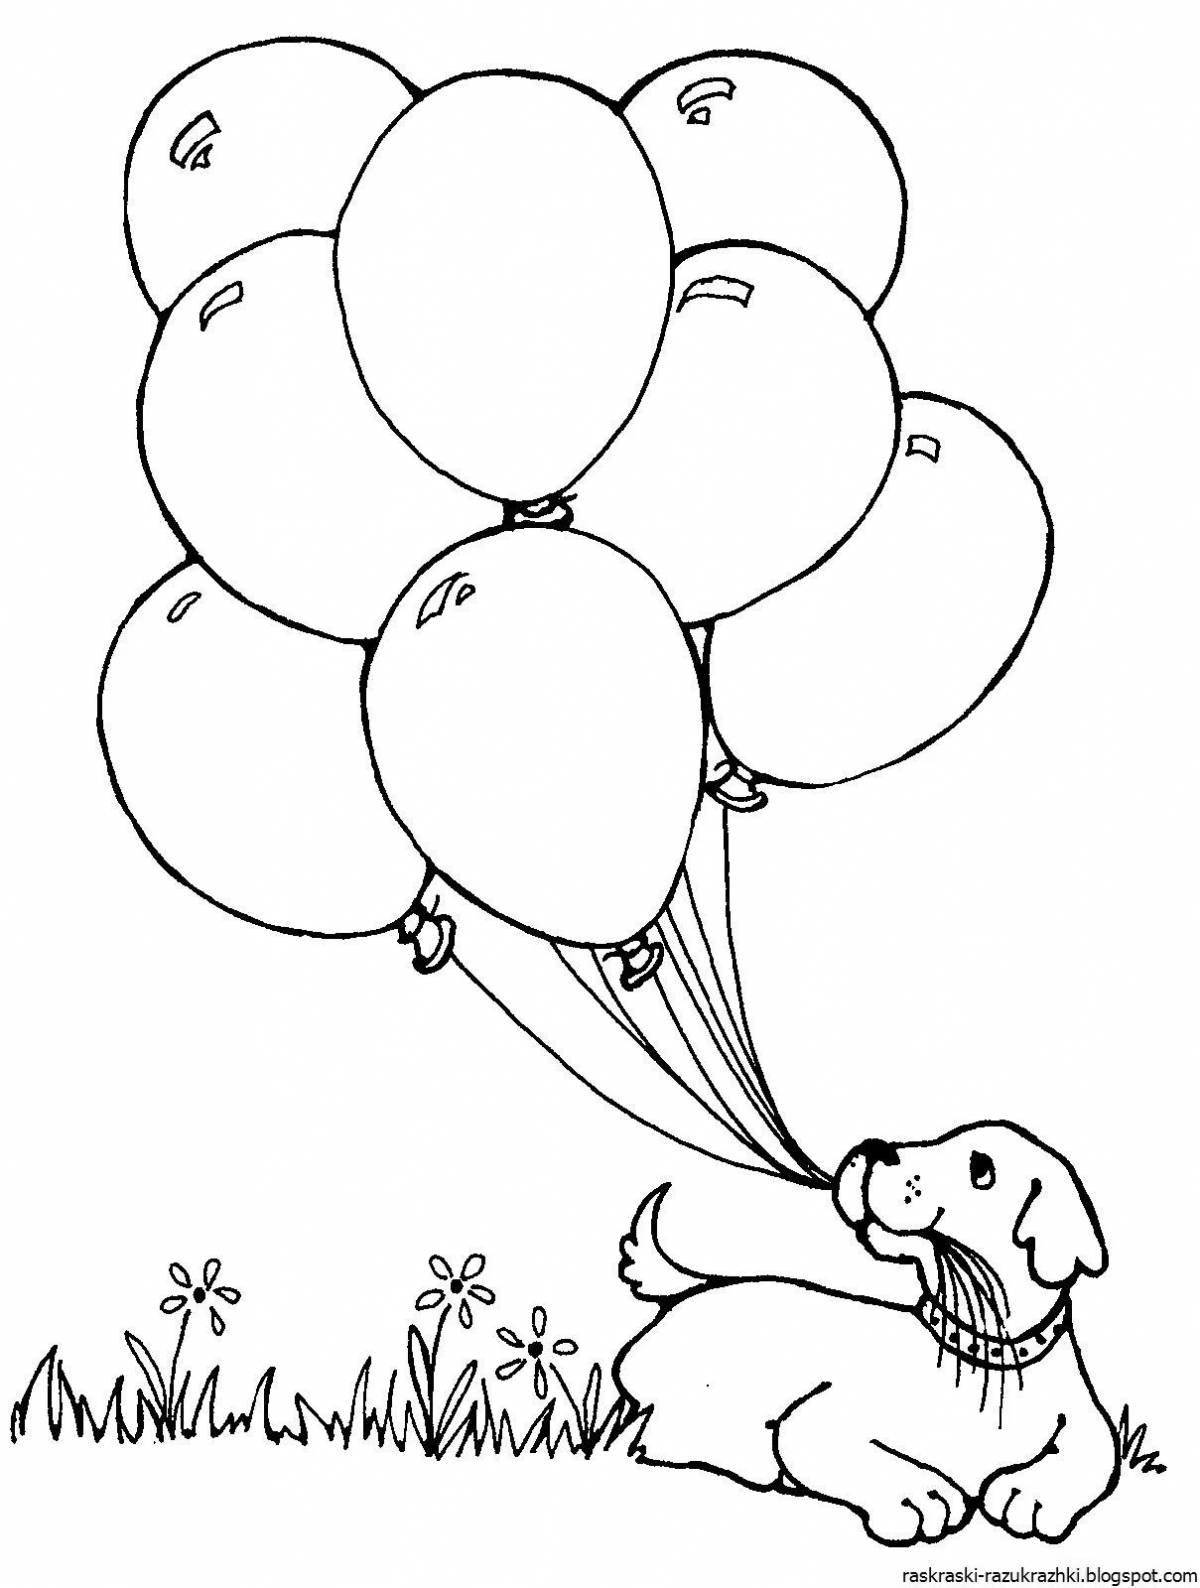 Outstanding balloon coloring page for kids